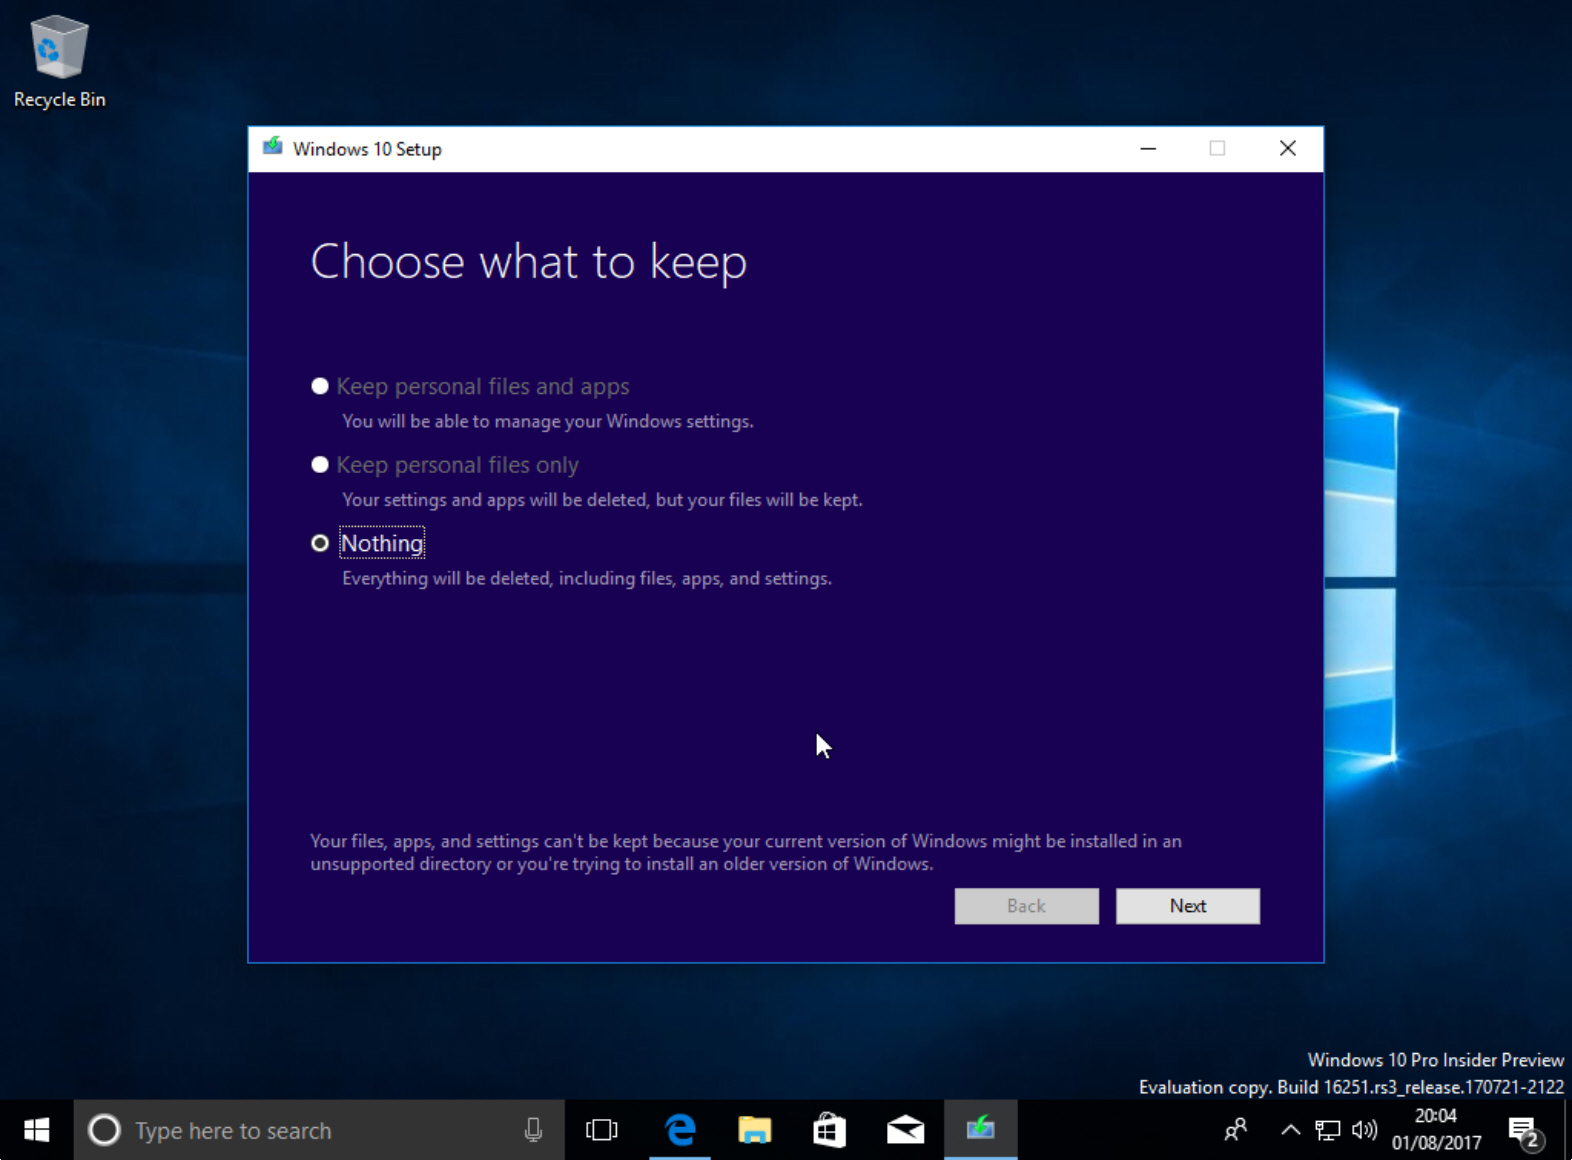 How to download and install Windows 10 S